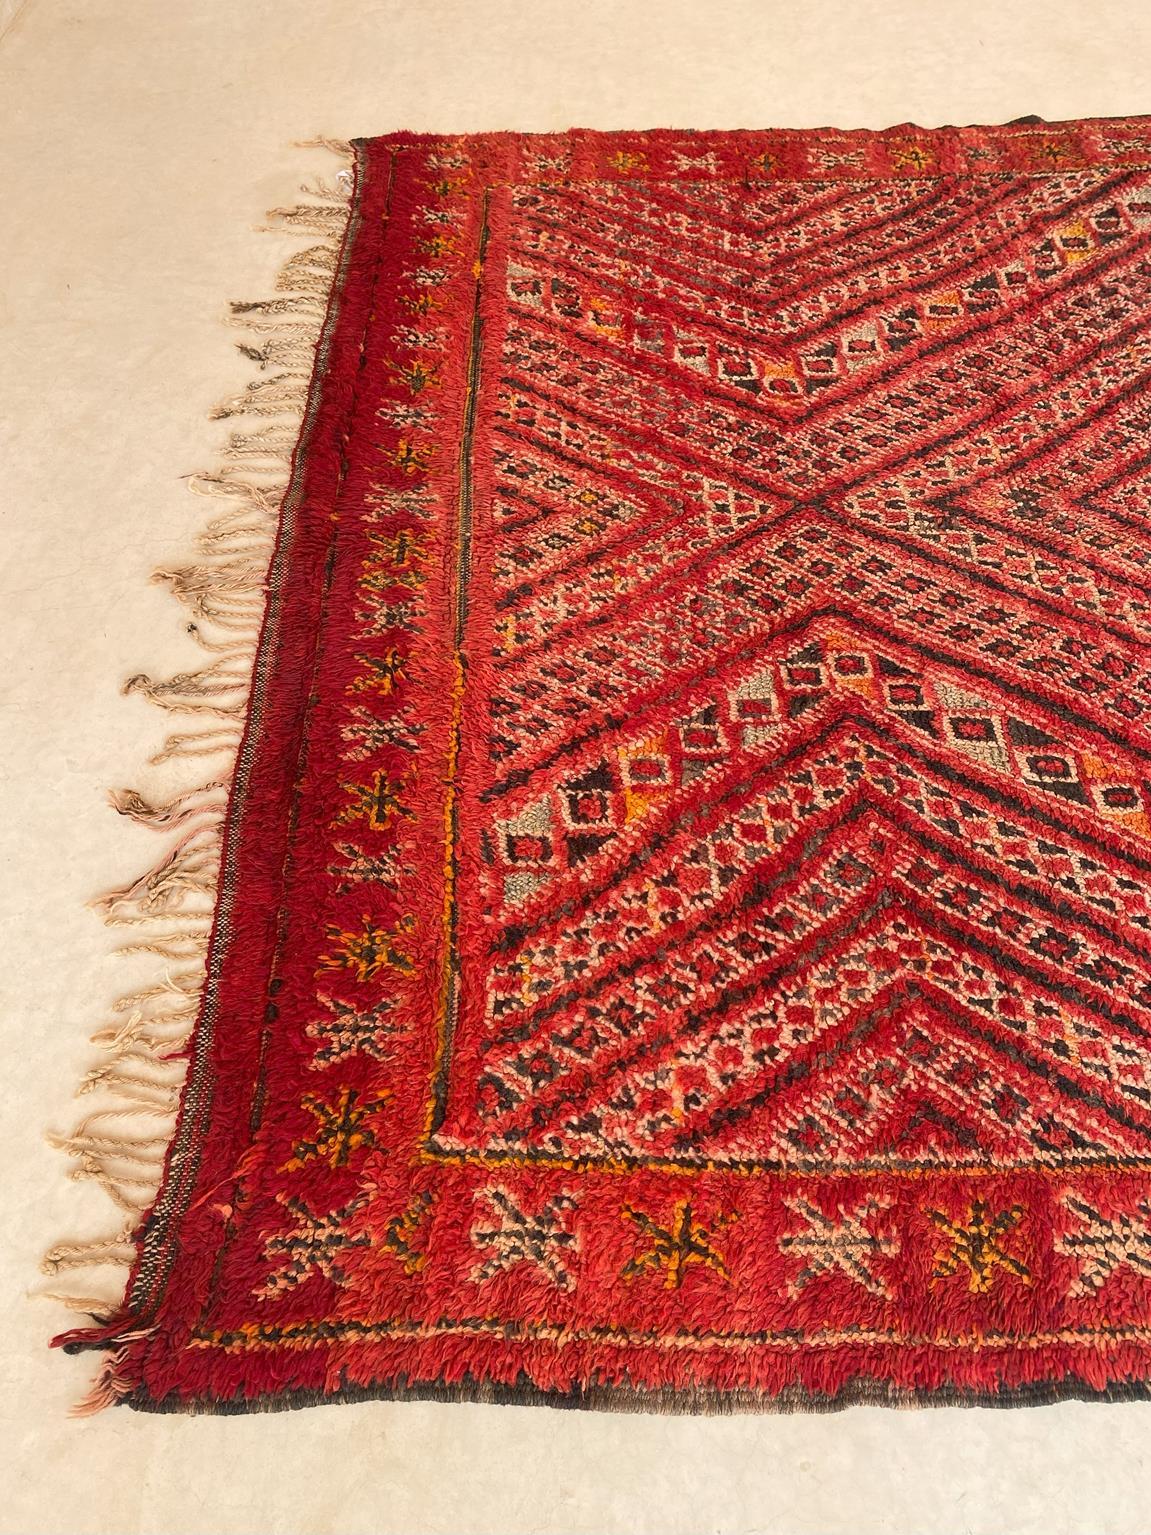 Wool Vintage Moroccan Zayane rug - Red - 6.7x11.3feet / 205x344cm For Sale